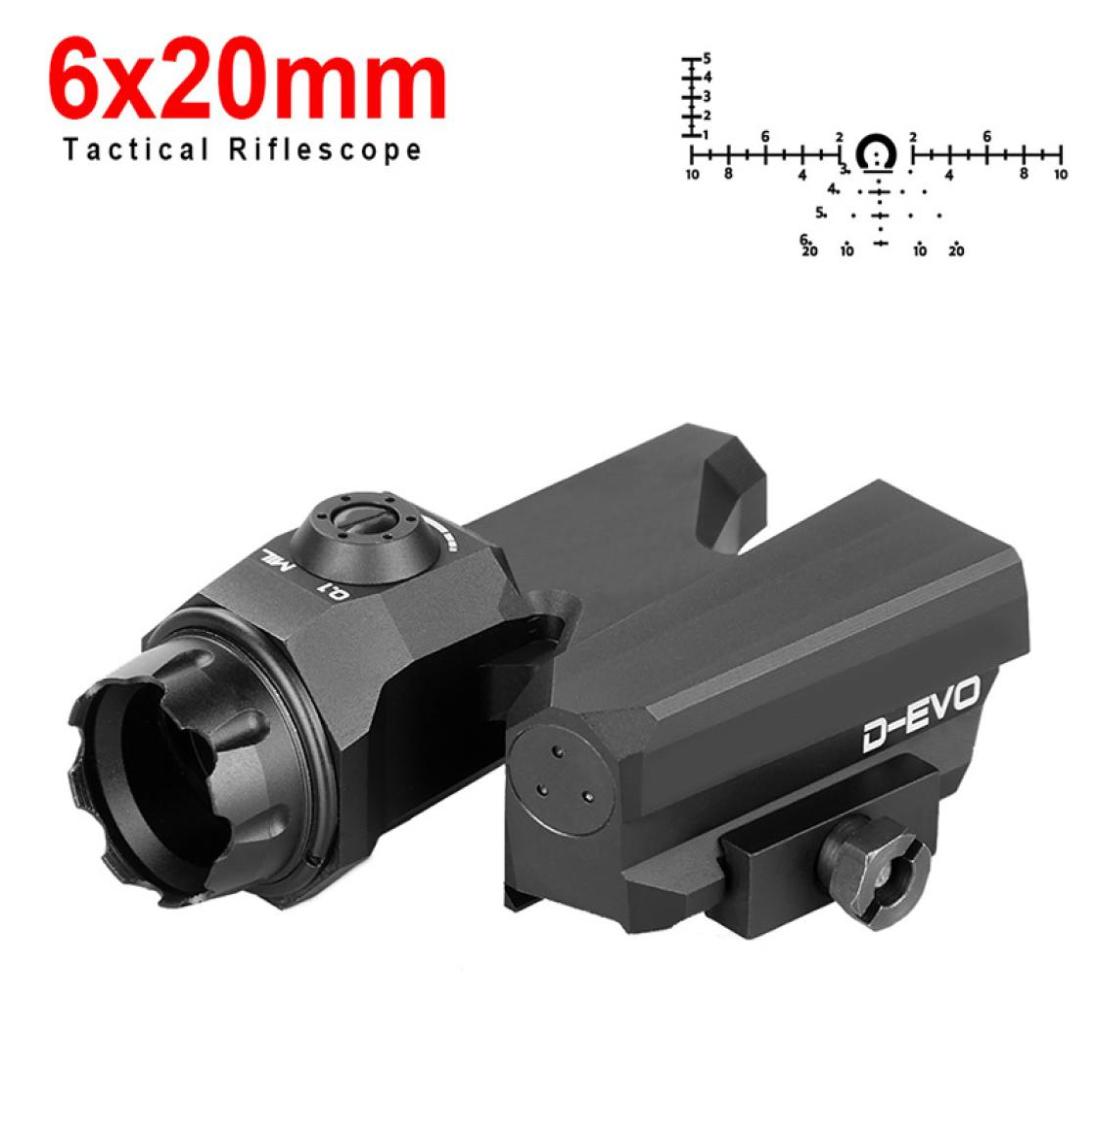 

PPT Scope DEVO 6x20mm Hunting Riflescope Sight Reflex Scope Rifle Sights For Airsoft Shooting Outdoor CL201216679681